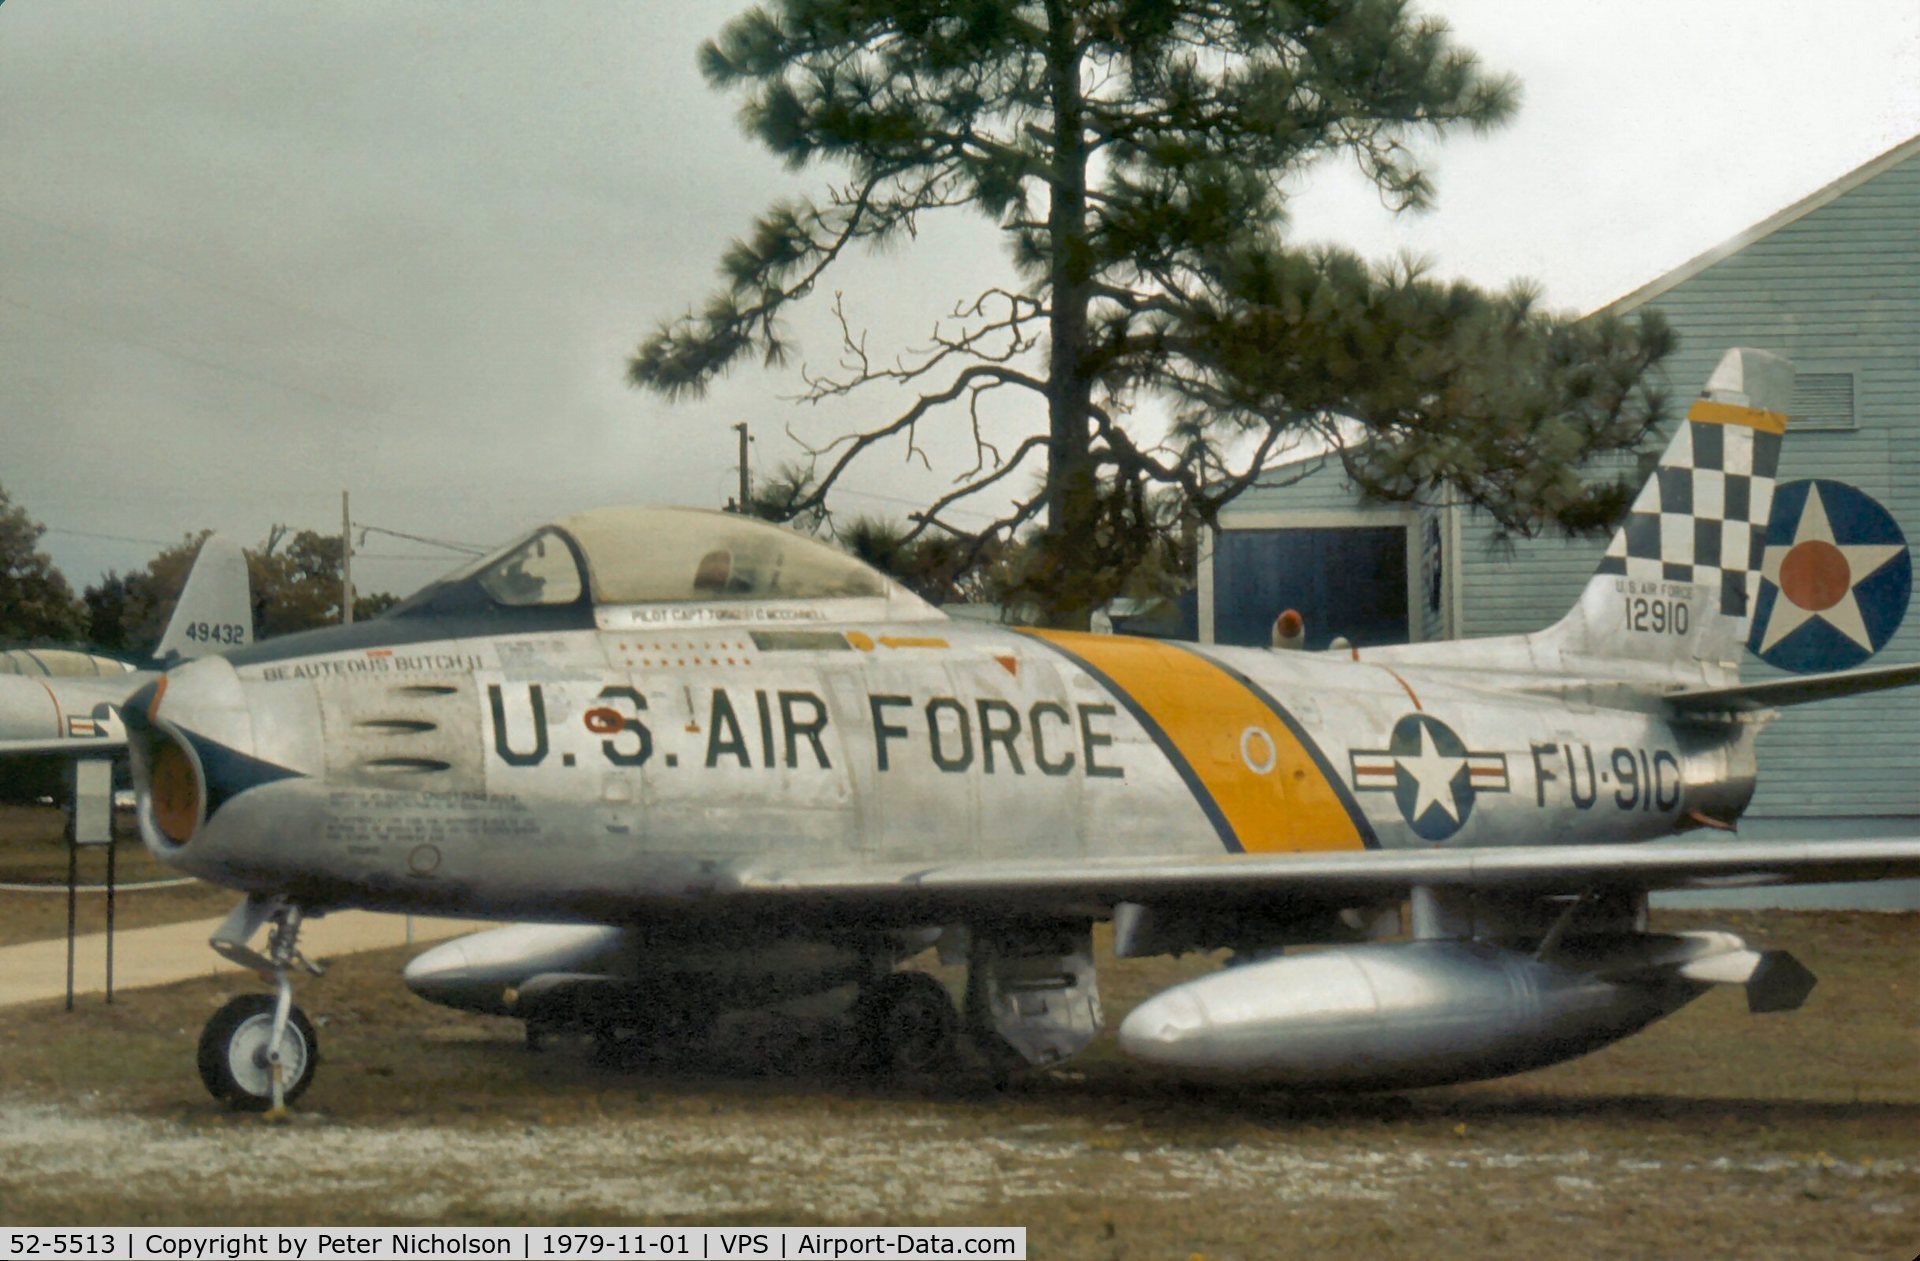 52-5513, 1952 North American F-86F-25-NA Sabre C/N 193-242, F-86F Sabre displayed at the USAF Armament Museum in November 1979 as 51-2910 named Beauteous Butch II of Korean War ace Col. Joseph McConnell